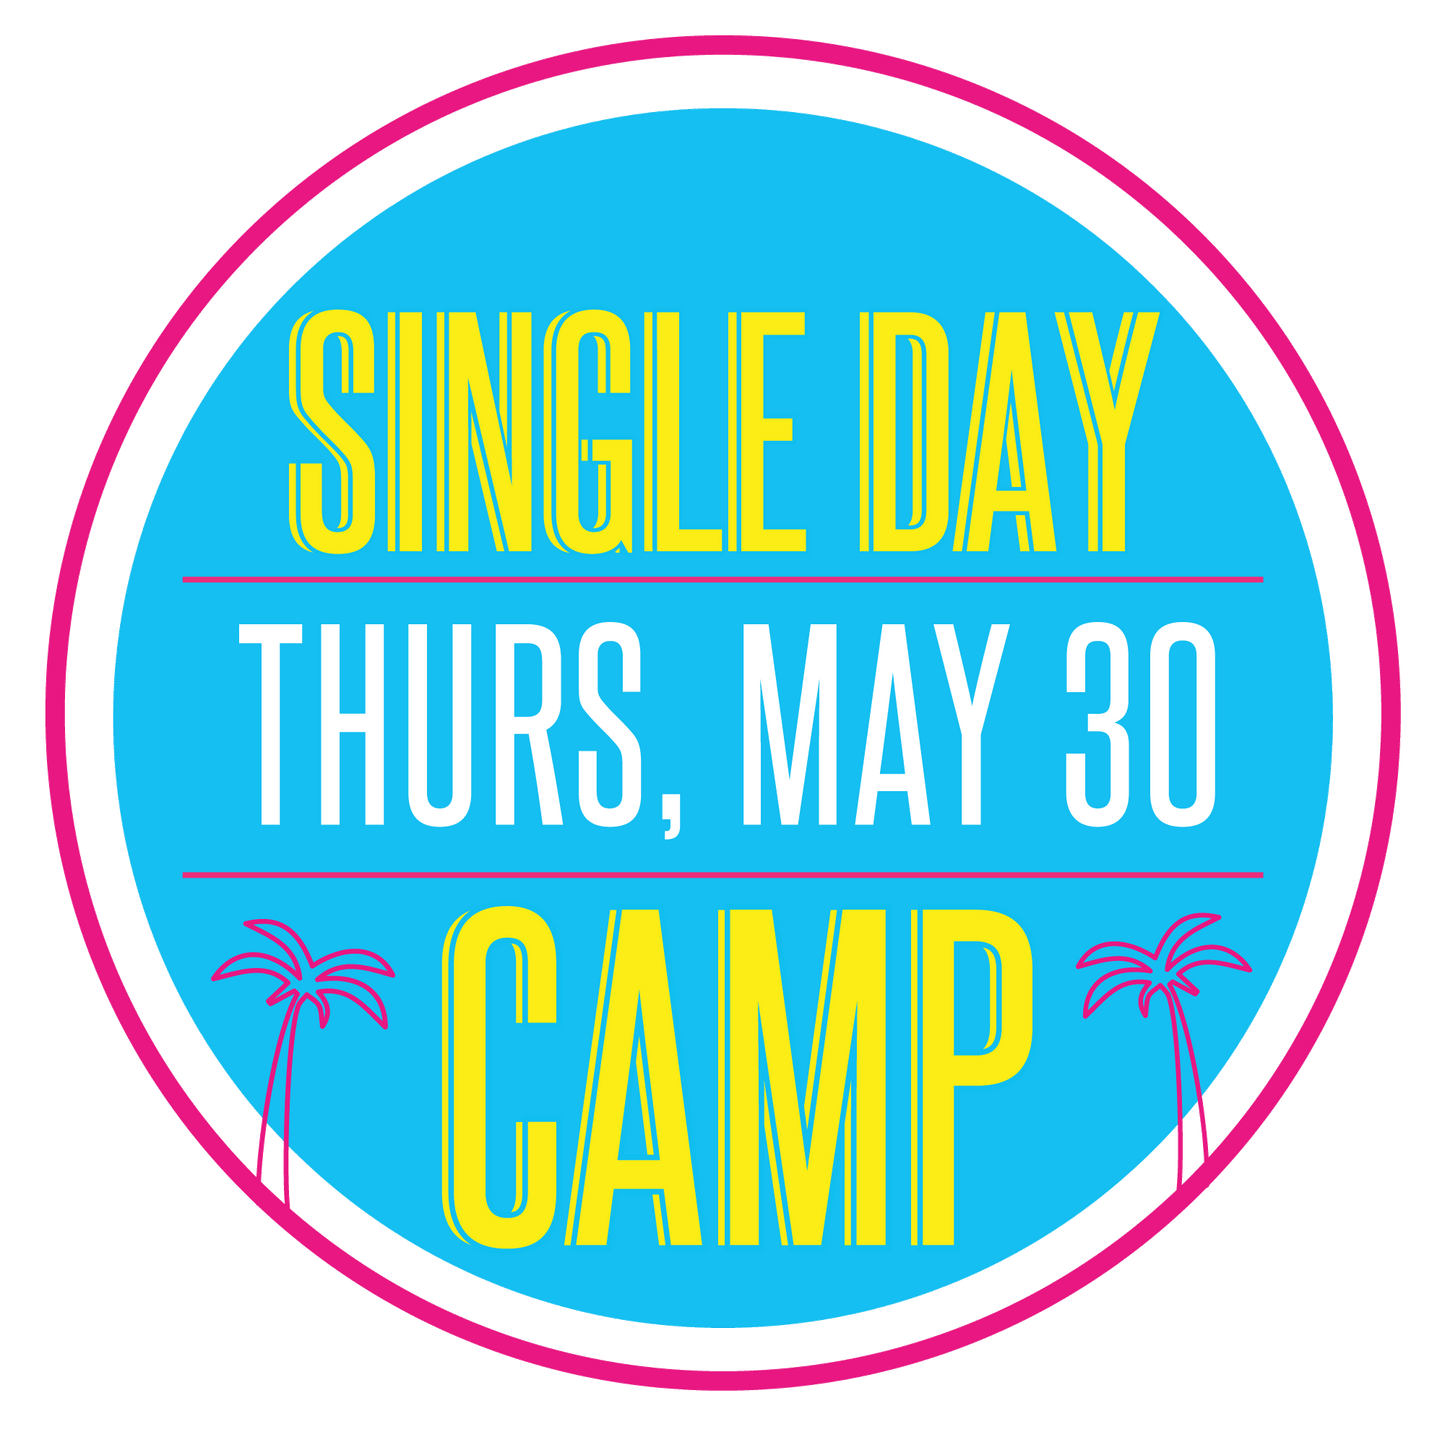 Single Day Sewing Workshop: Thursday, May 30, 9am-3pm